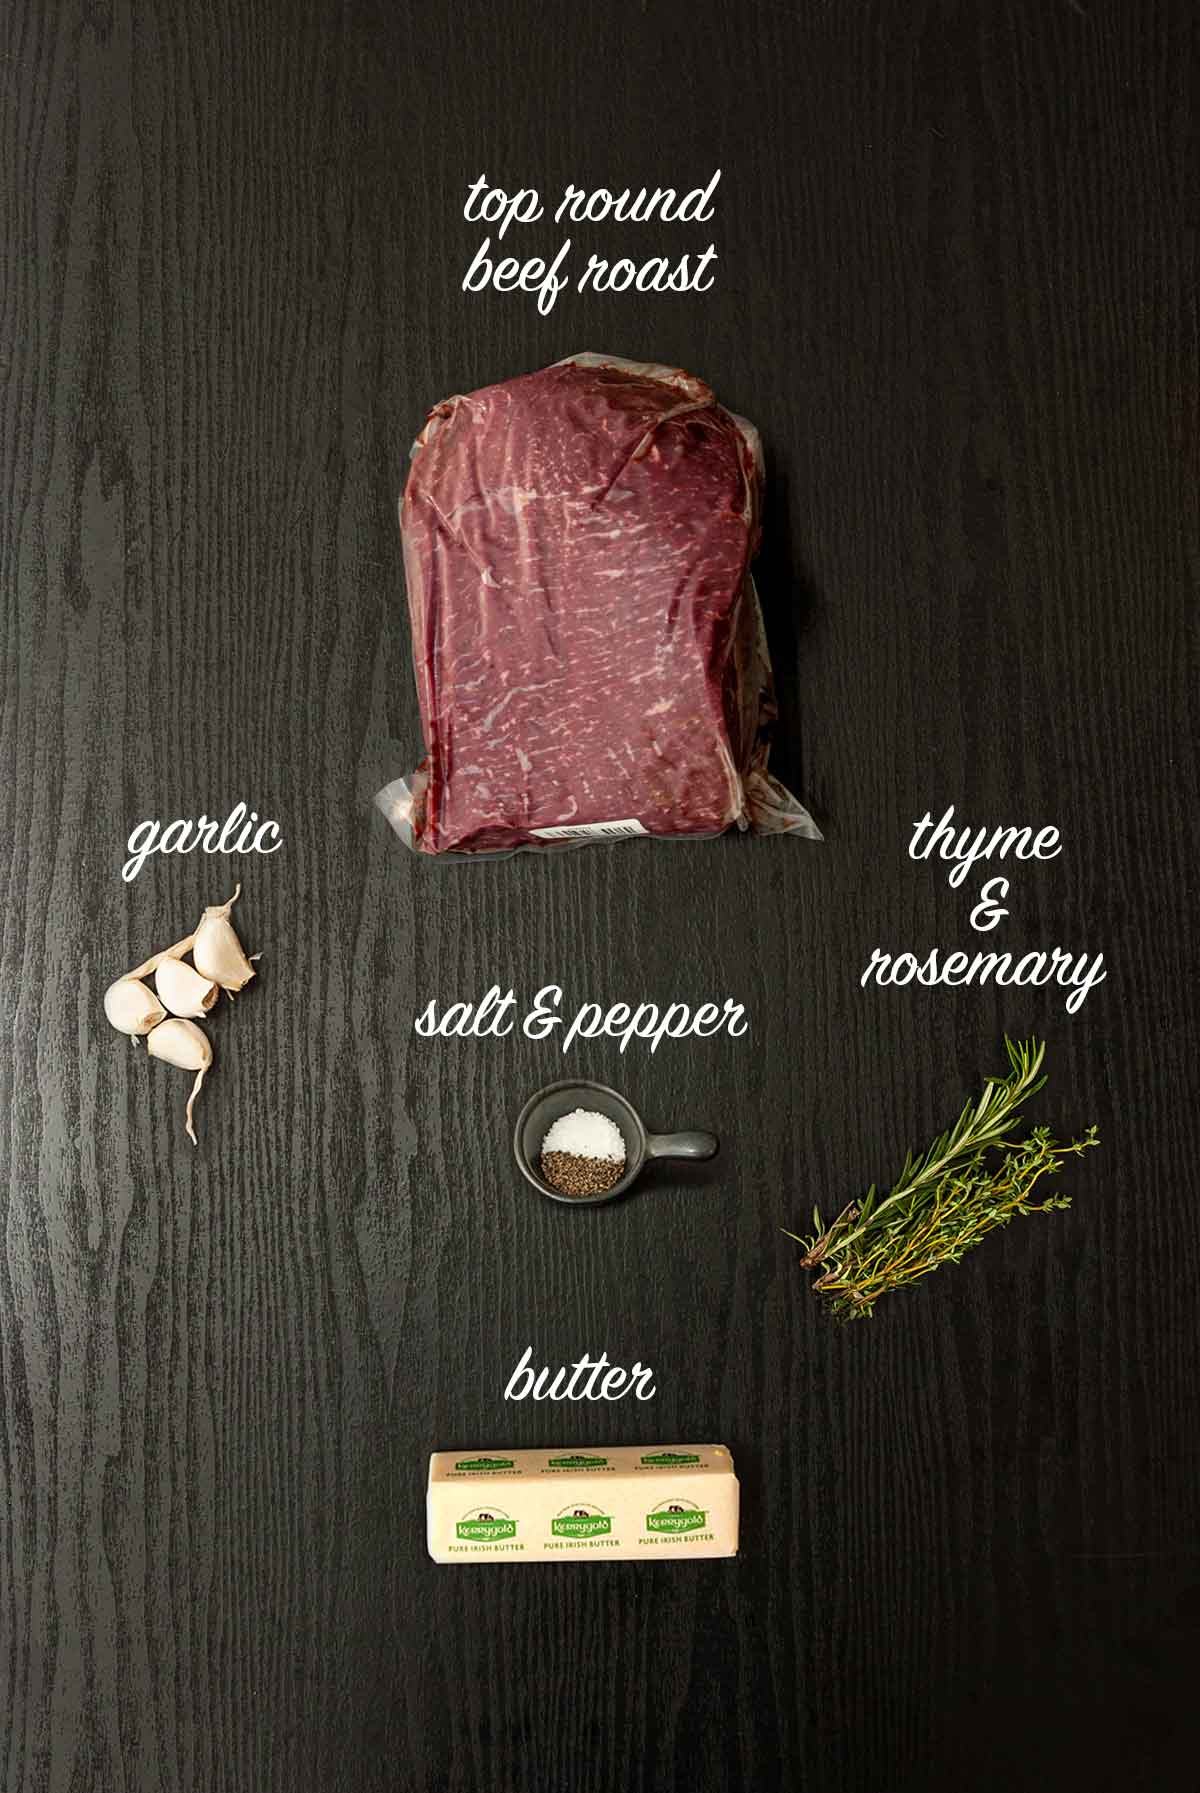 5 ingredients on a table for making top round roast beef with labels.